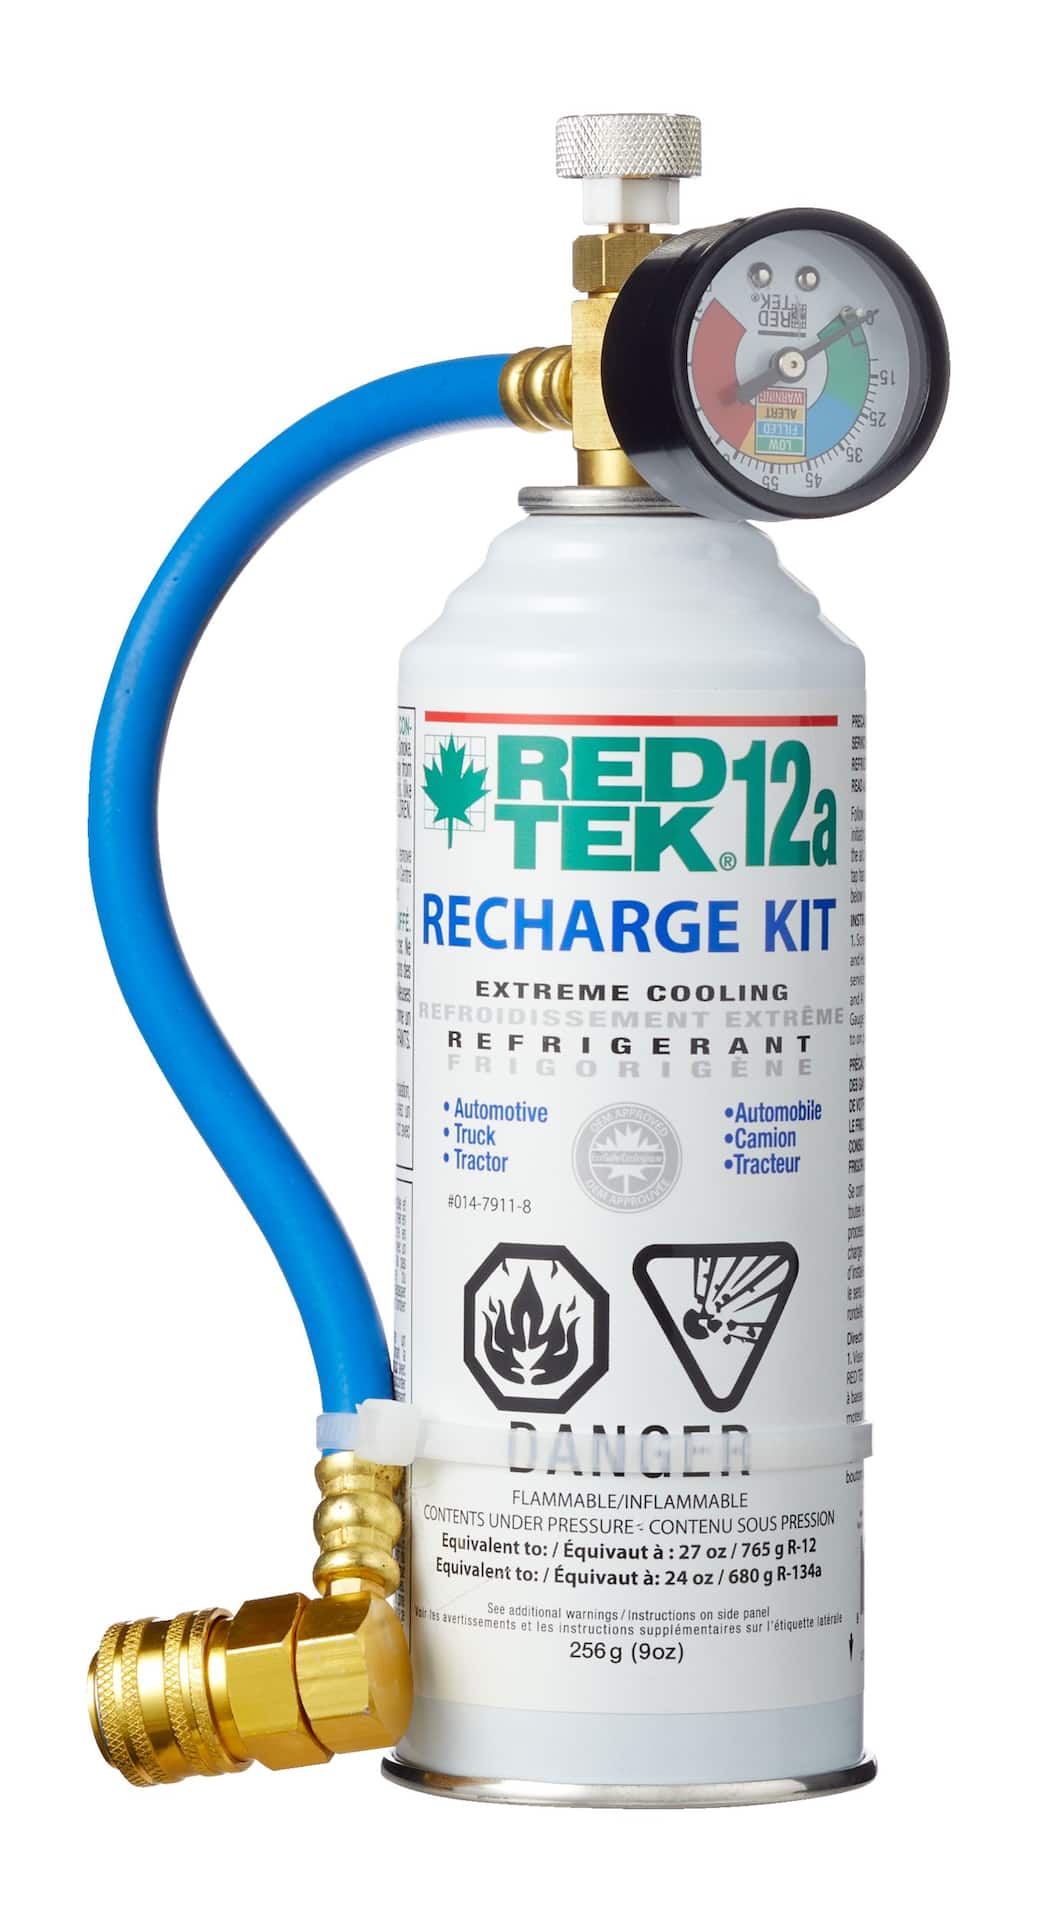 https://media-www.canadiantire.ca/product/automotive/heavy-auto-parts/air-conditioning-chemicals/0147911/r12a-375-refrigerant-recharge-kit-757025d4-ed60-4946-89d0-341eca5f4c85-jpgrendition.jpg